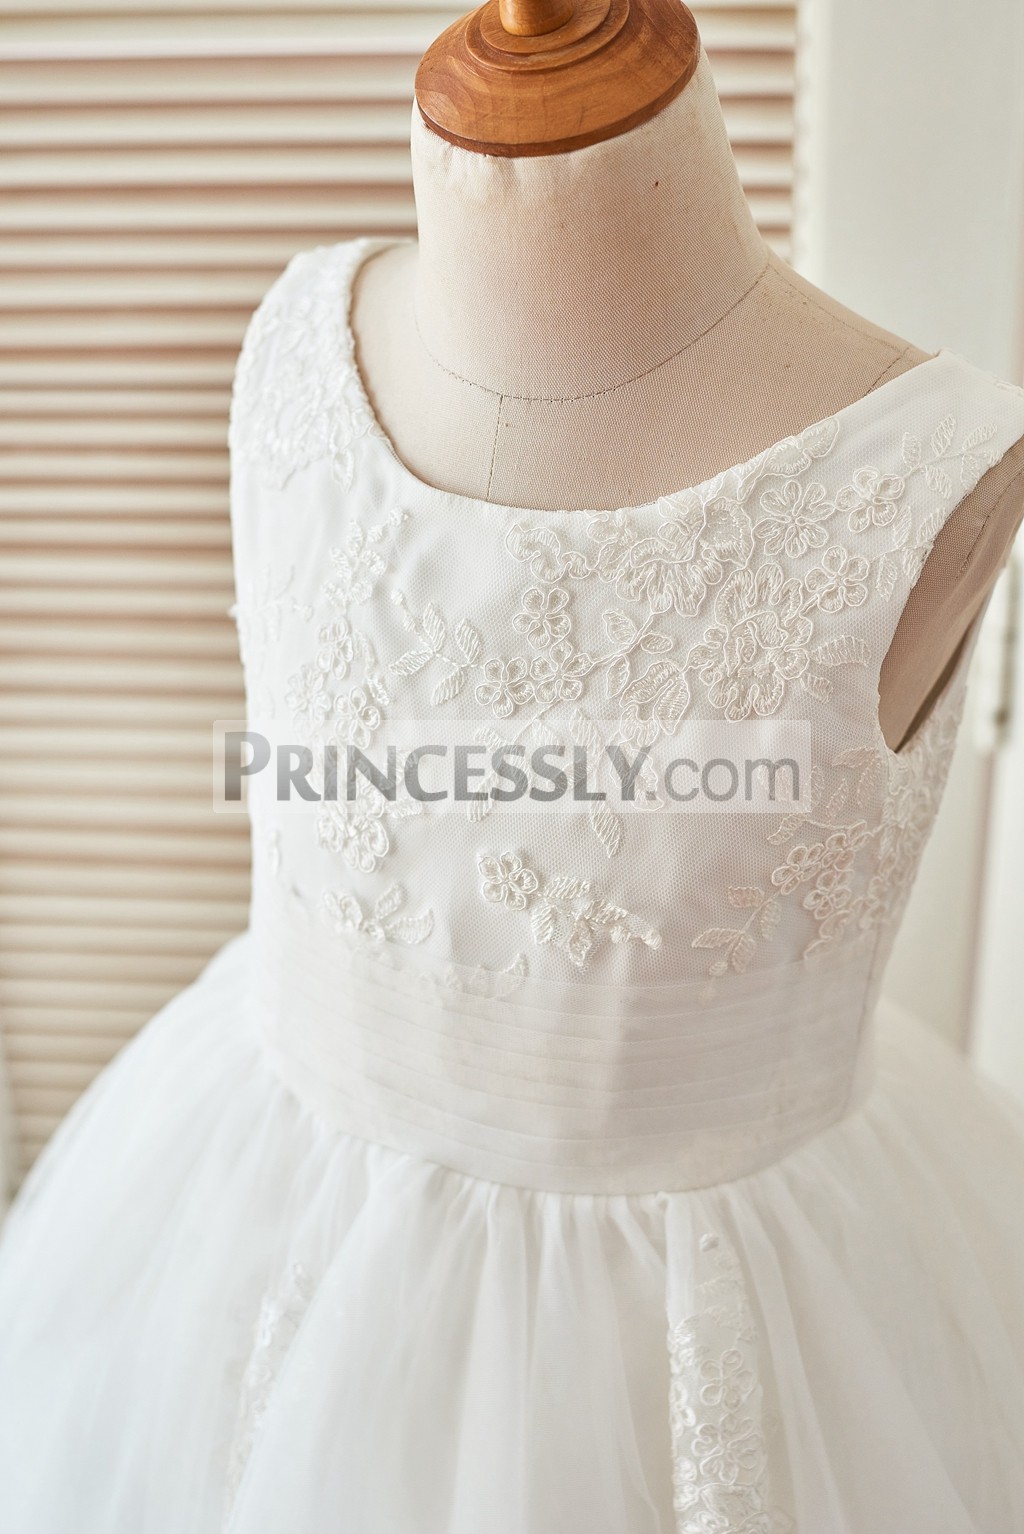 Delicate lace appliques on scoop neckline and sleeveless bodice